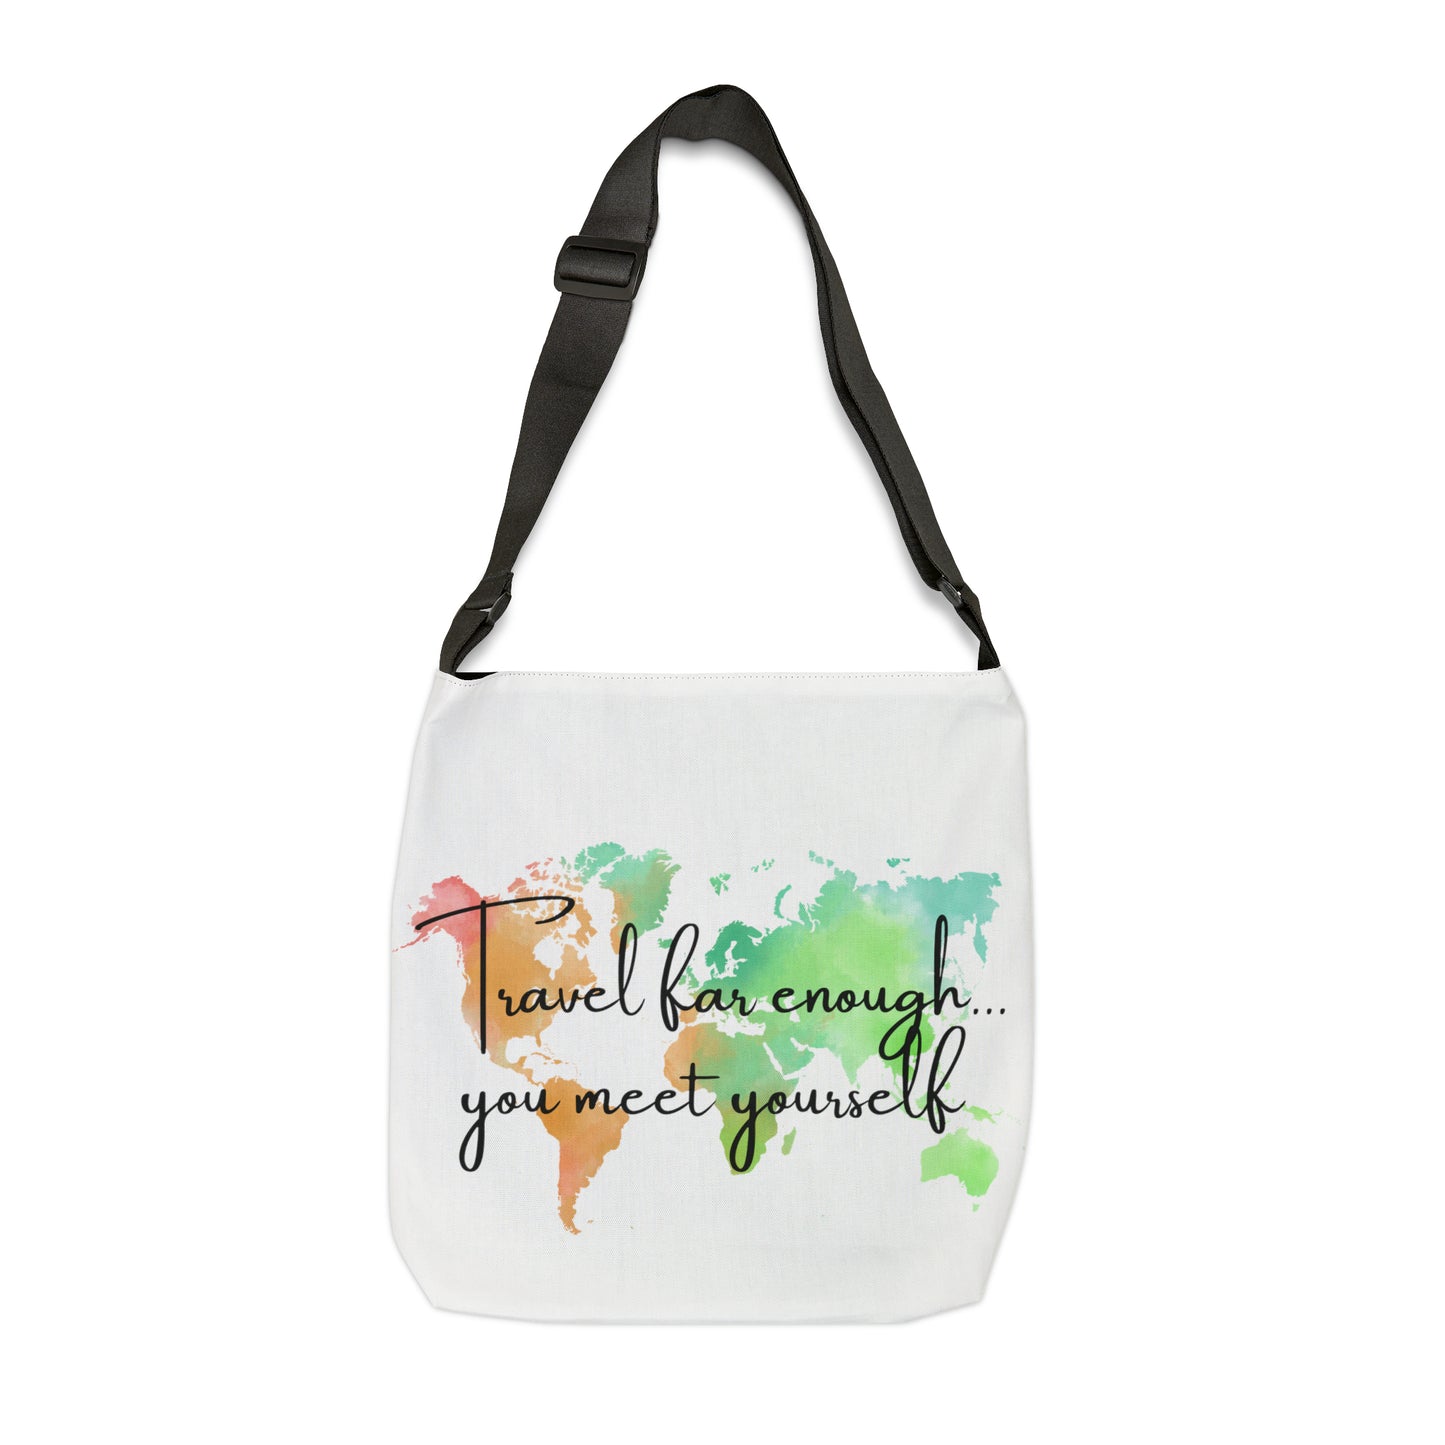 Travel Inspiration Tote Bag w/ Watercolor World Map